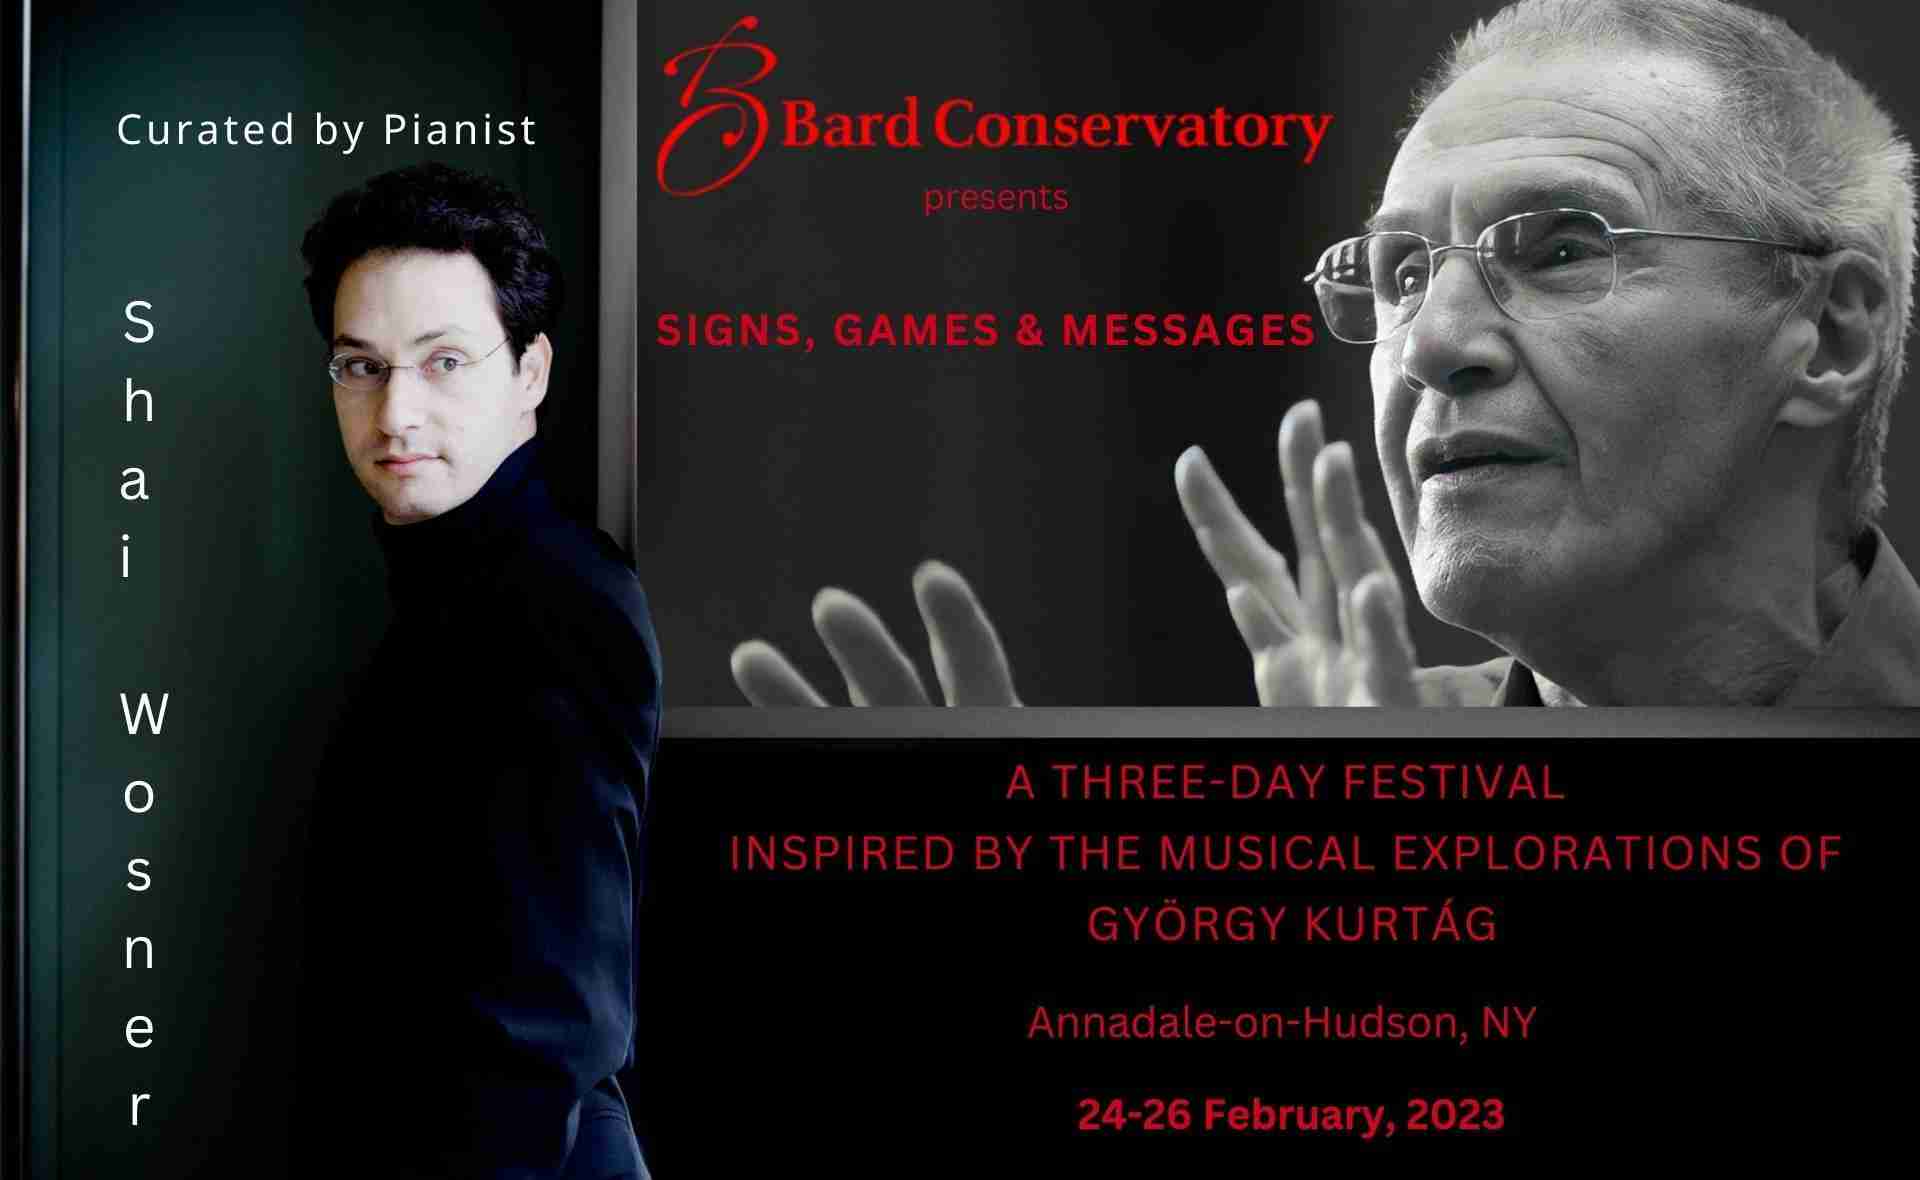 SIGNS, GAMES & MESSAGES - A Three-Day Festival celebrating the work of György Kurtág